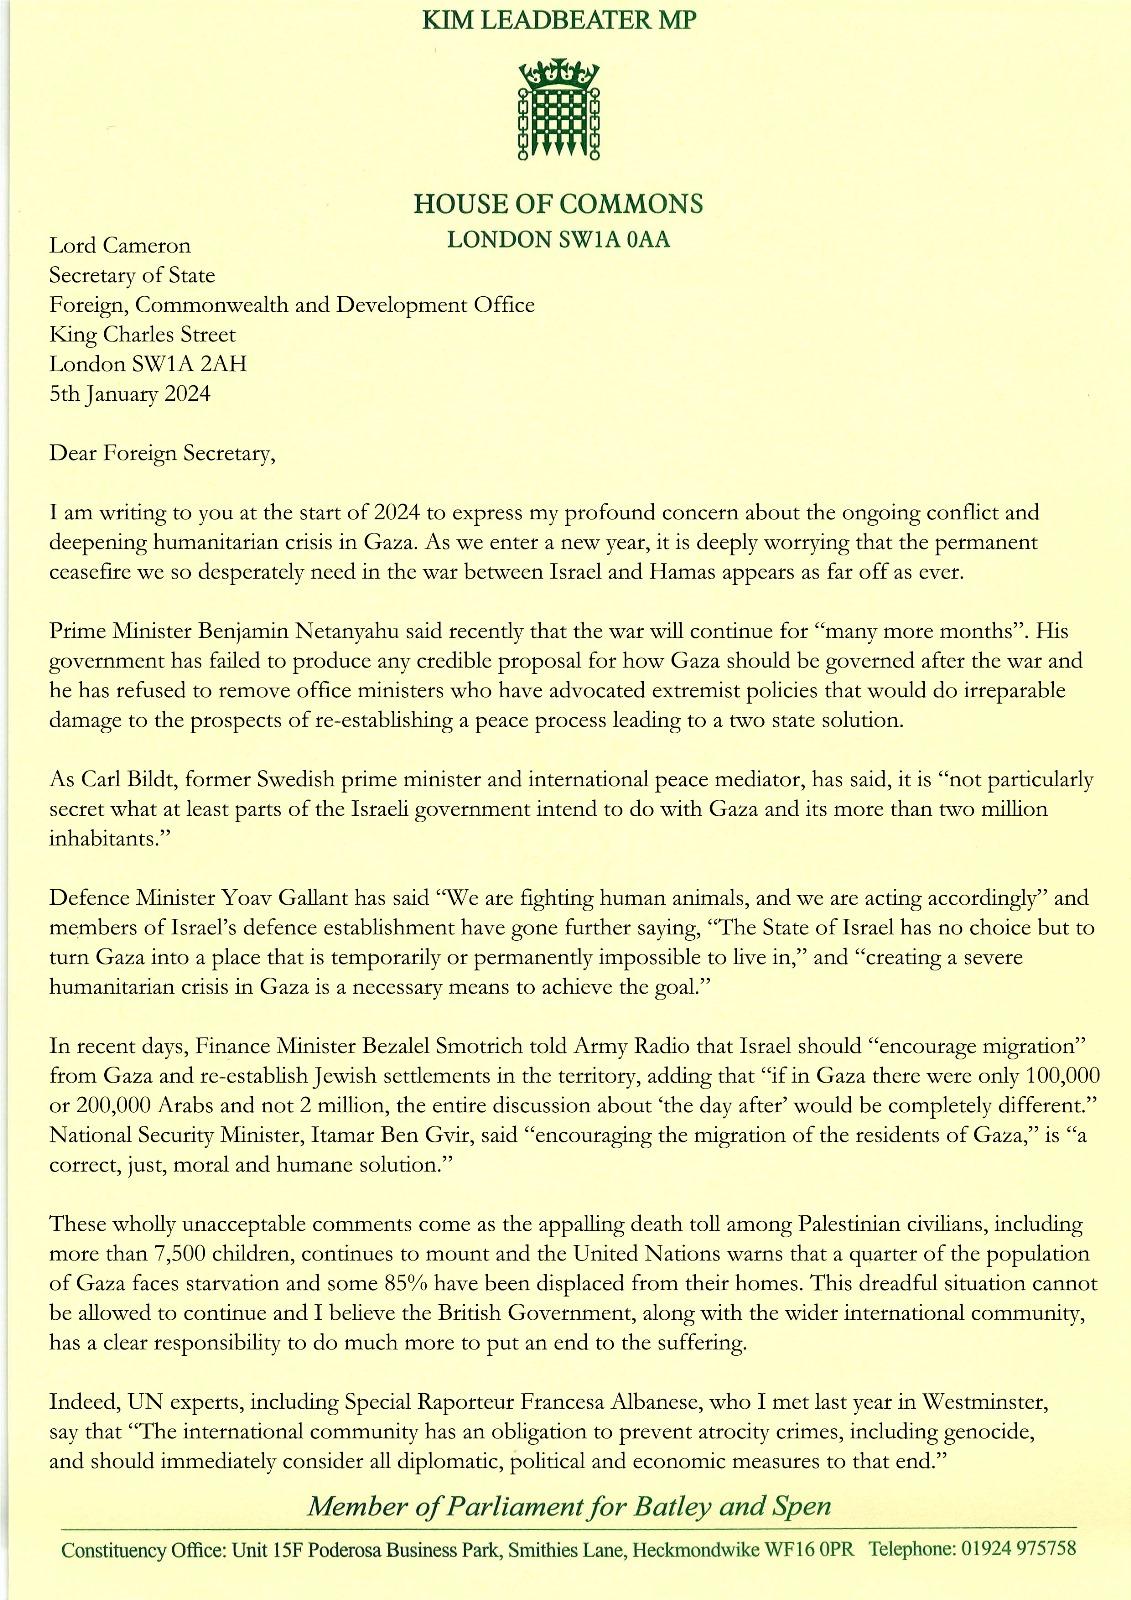 Letter to Foreign Sec 5 January 2024